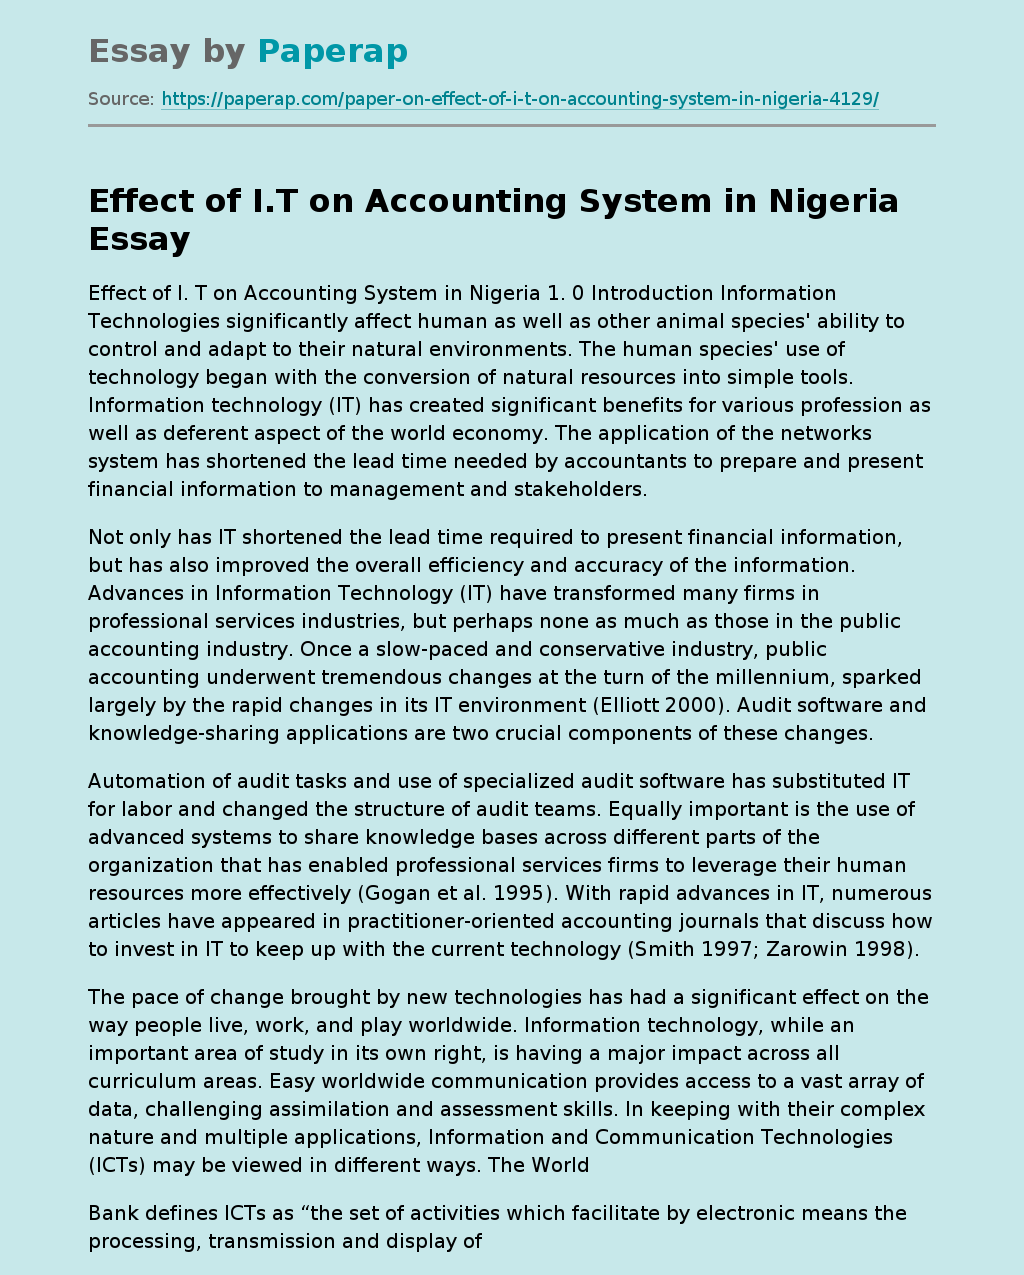 The Impact of IT on the Accounting System in Nigeria